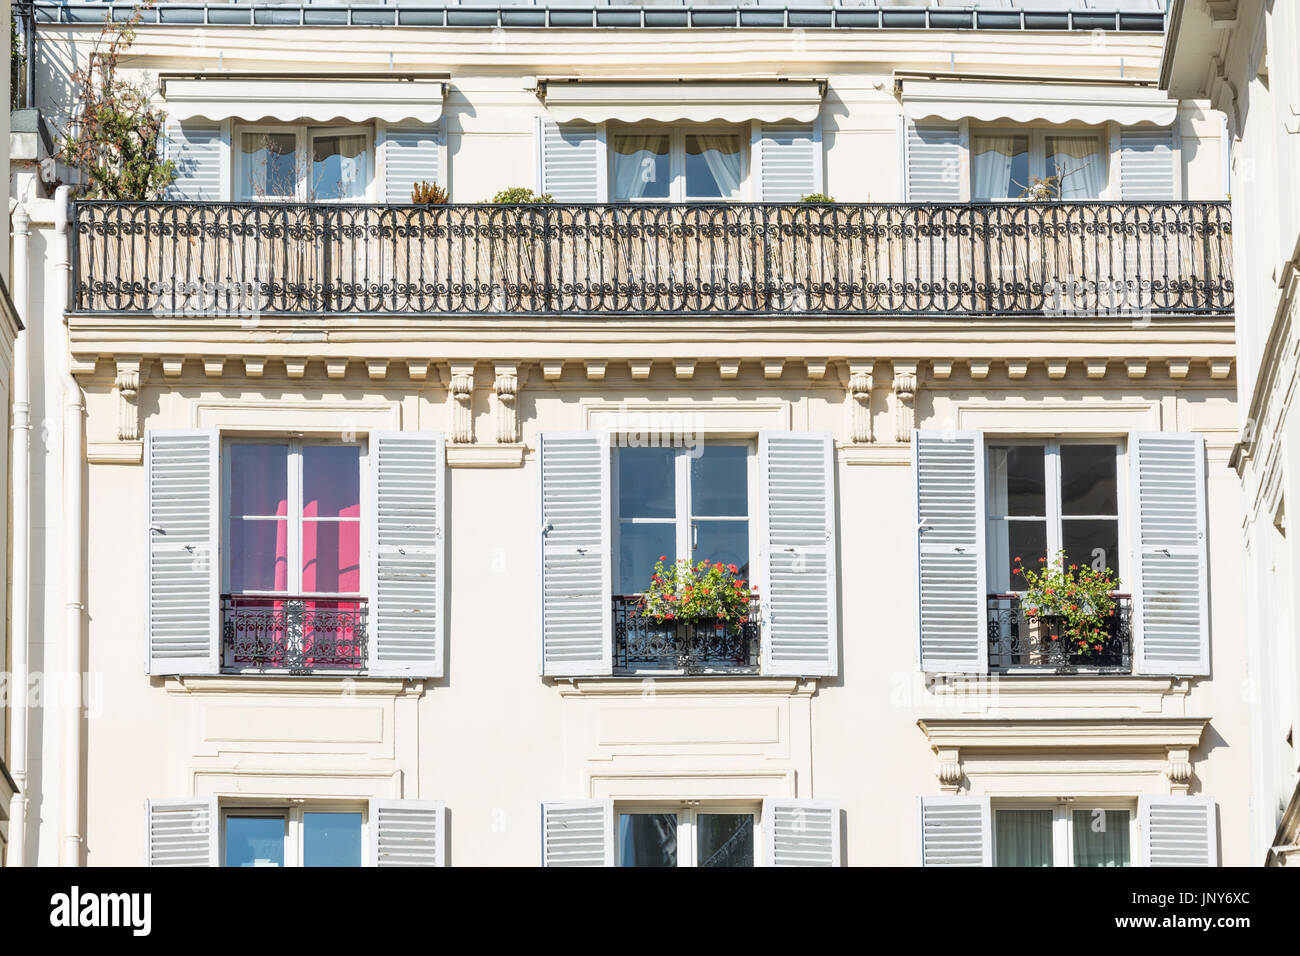 Paris, France - February 29, 2016: Typical Haussmann apartment building façade with shutters, curtains, balconies, awnings and window boxes, Paris, France. Stock Photo